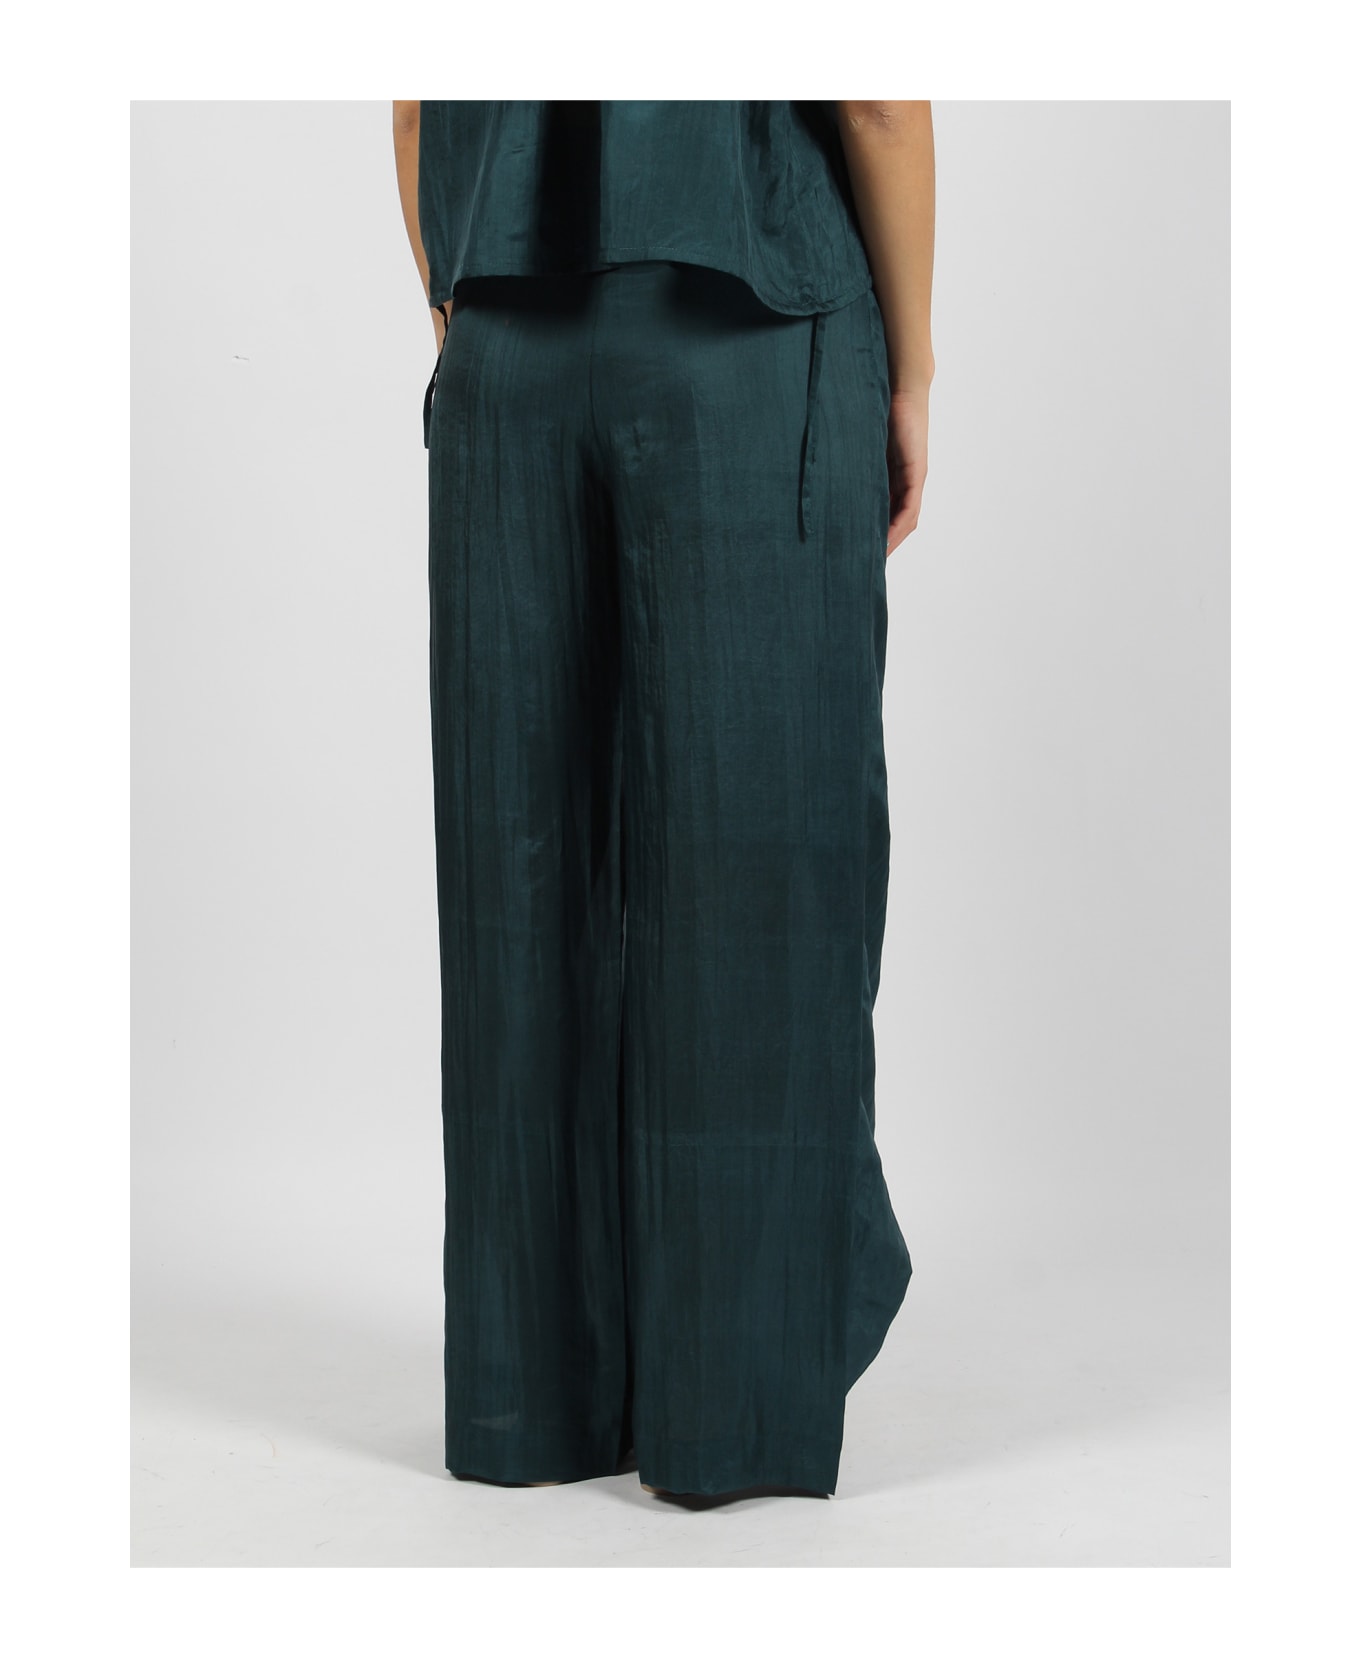 The Rose Ibiza Wrap Silk Trousers - Blue ボトムス